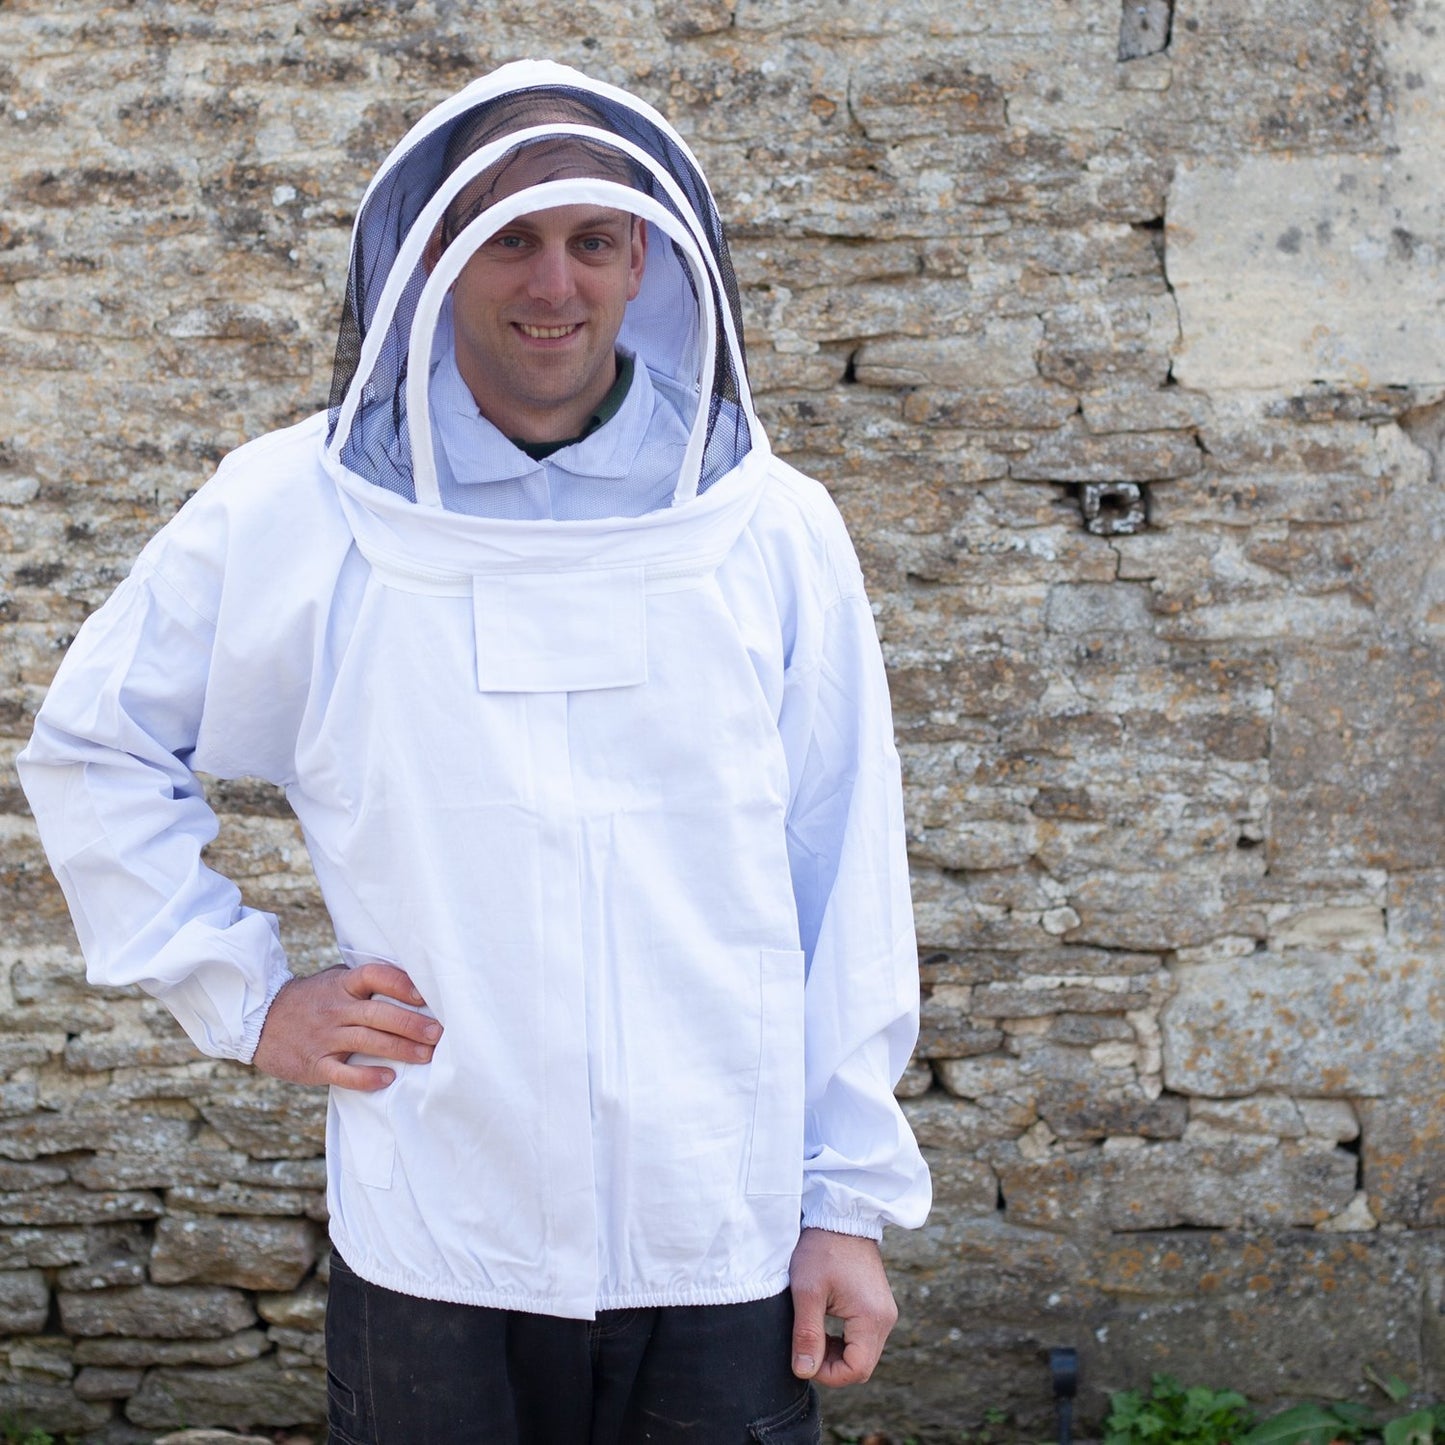 Quality Half Bee Suit Fits Most Adult Sizes